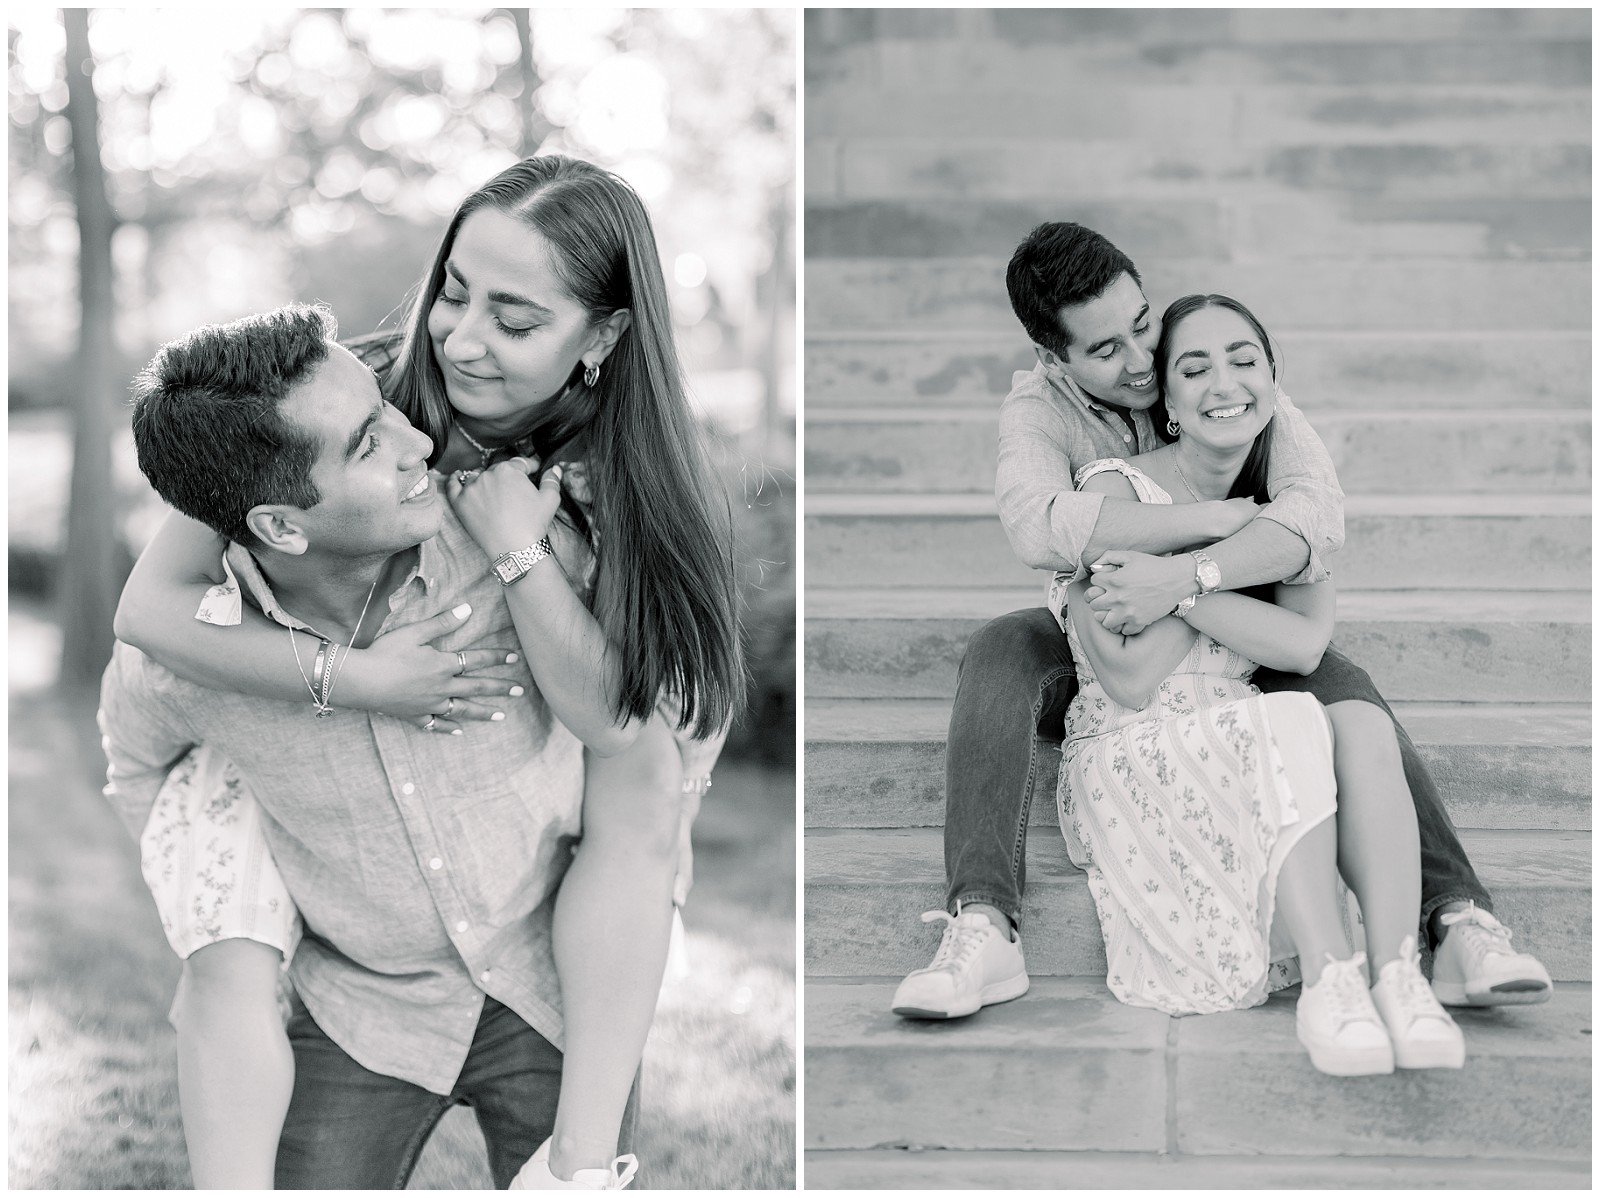 Summer-Engagement-Photos-at-The-Nelson-Atkins-K+S-0522-Elizabeth-Ladean-Photography-photo-_6488.jpg